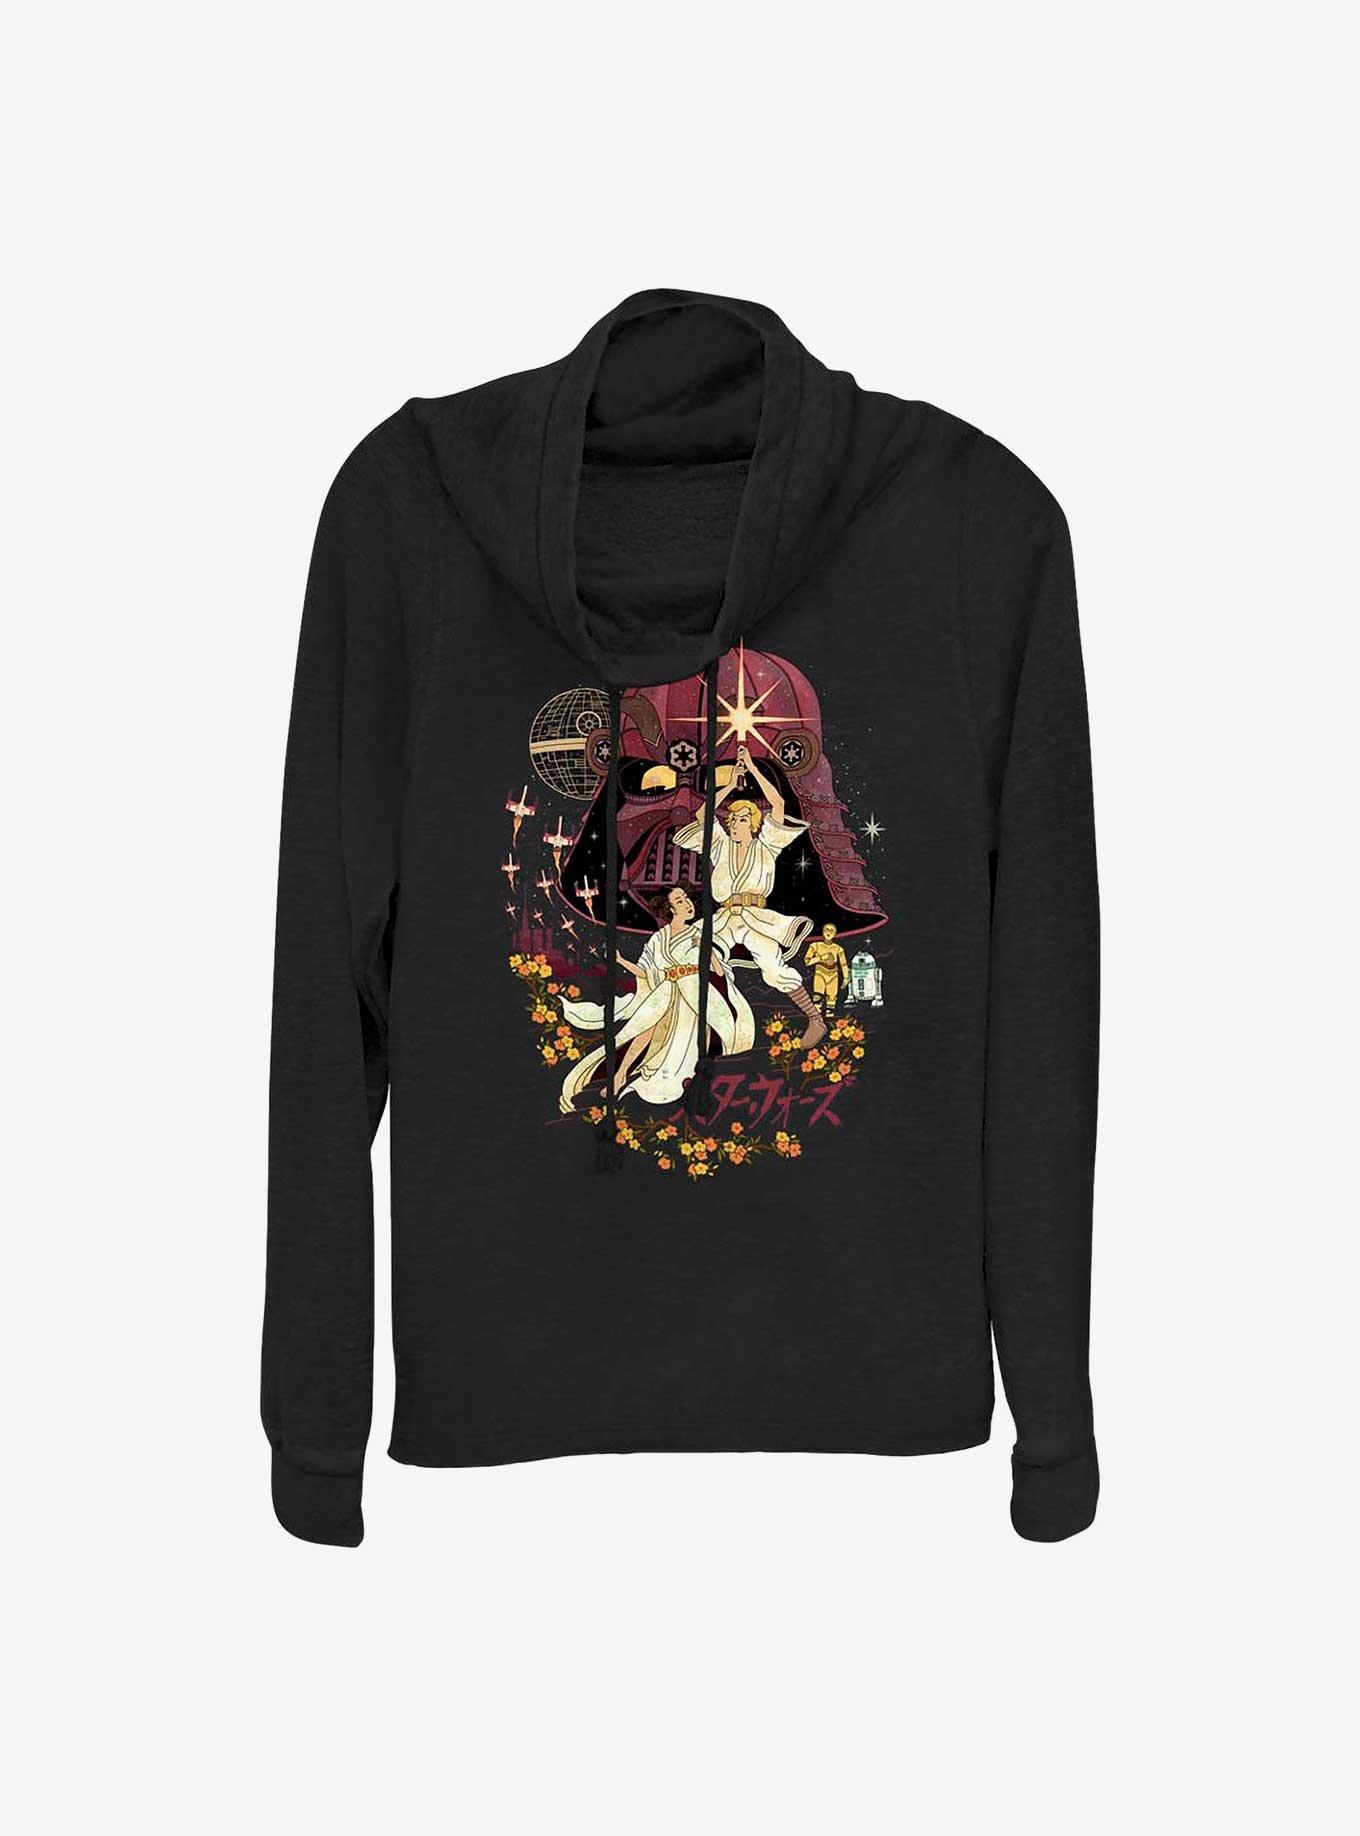 Star Wars Japanese Painting Style Luke and Leia Cowl Neck Long-Sleeve Top, BLACK, hi-res